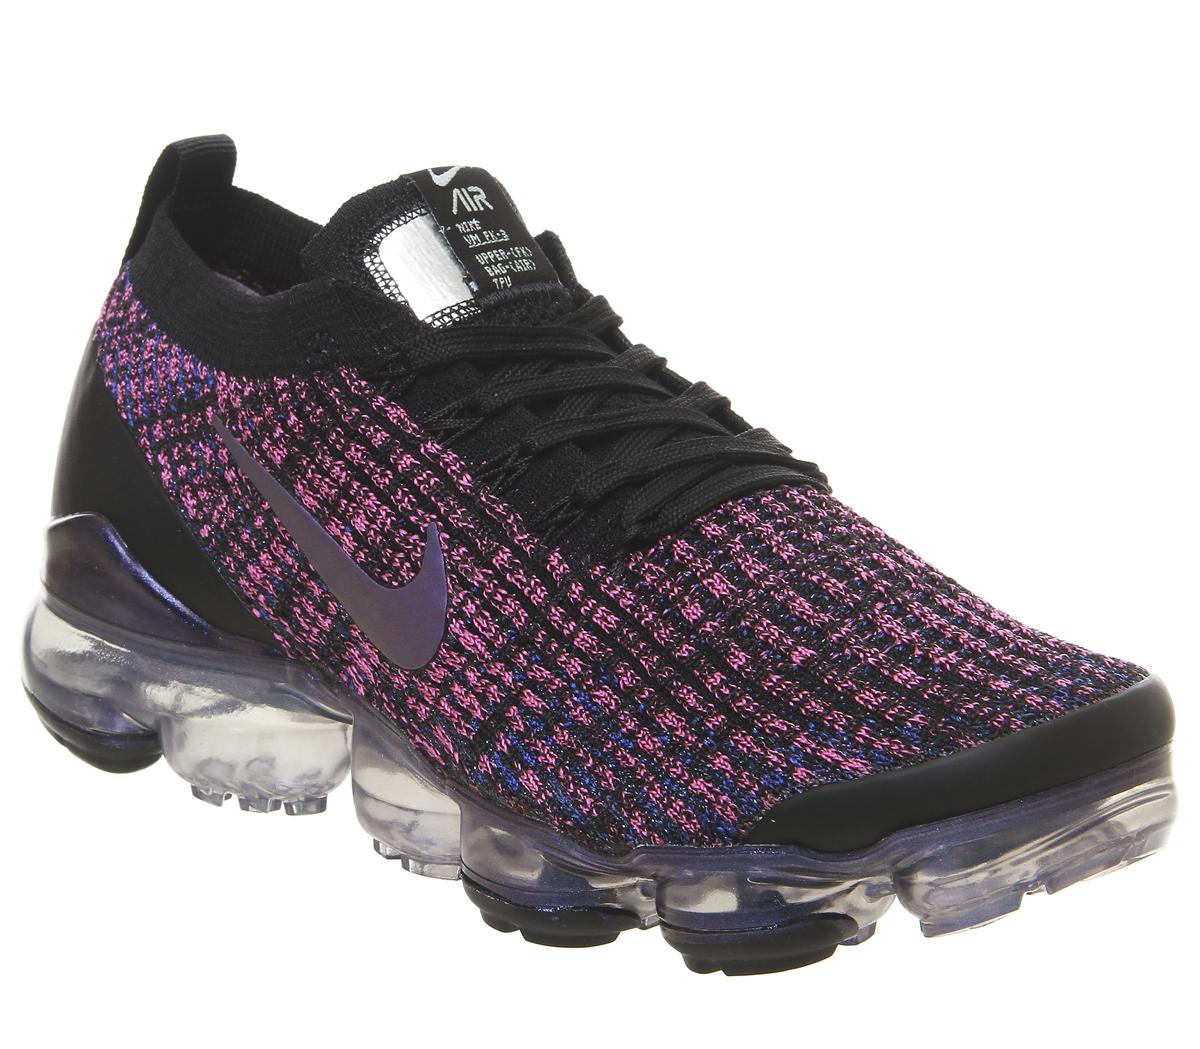 Nike Vapormax Air Vapormax Fk 3 Trainers Black Racer Blue Laser Fuchsia F -  Hers trainers